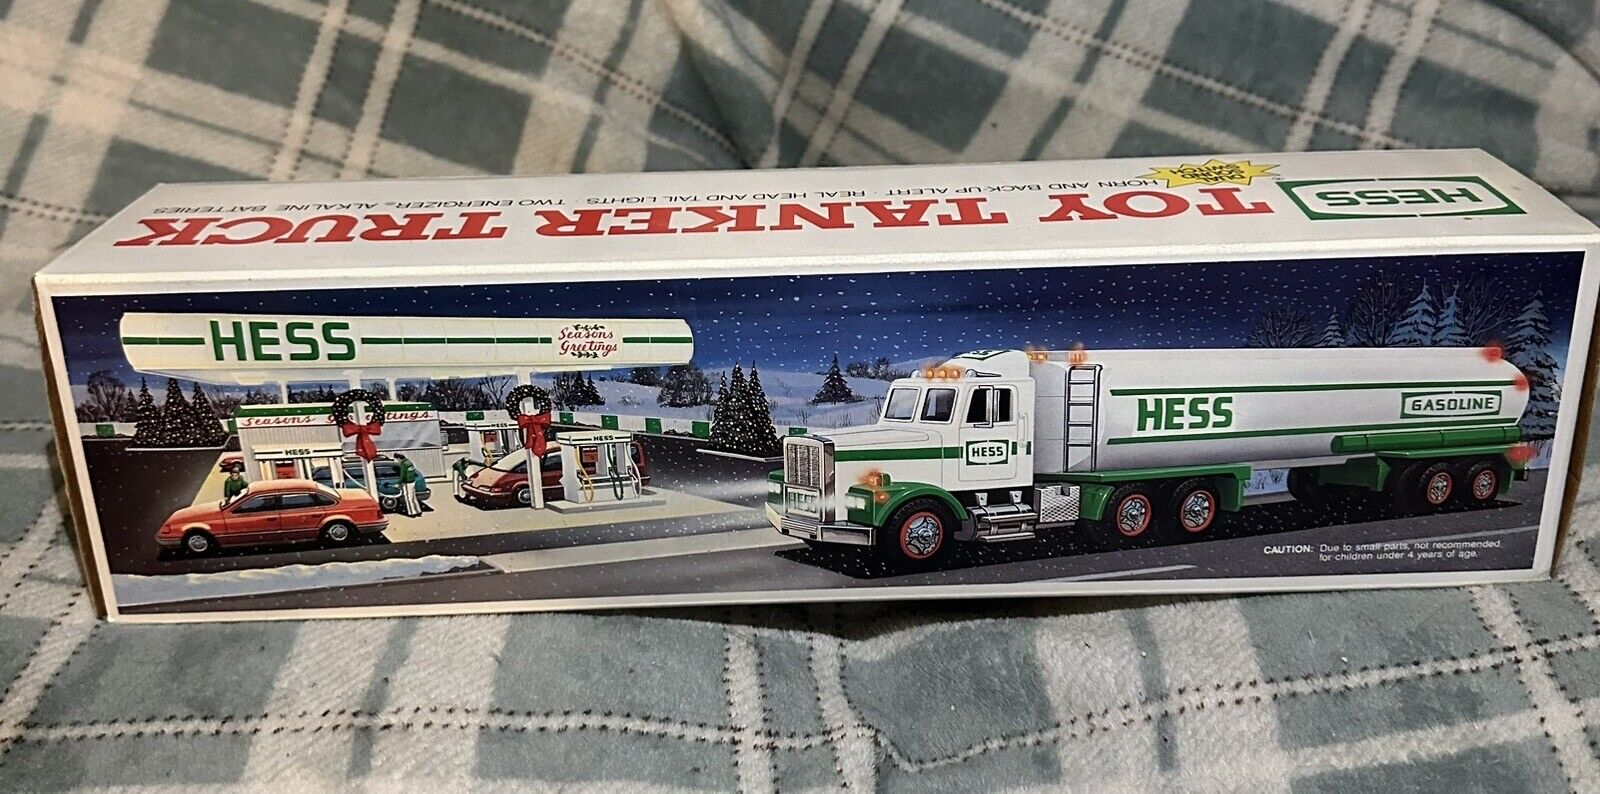 1990 HESS Original Toy Tanker Truck Gas Collectible New In Original Box